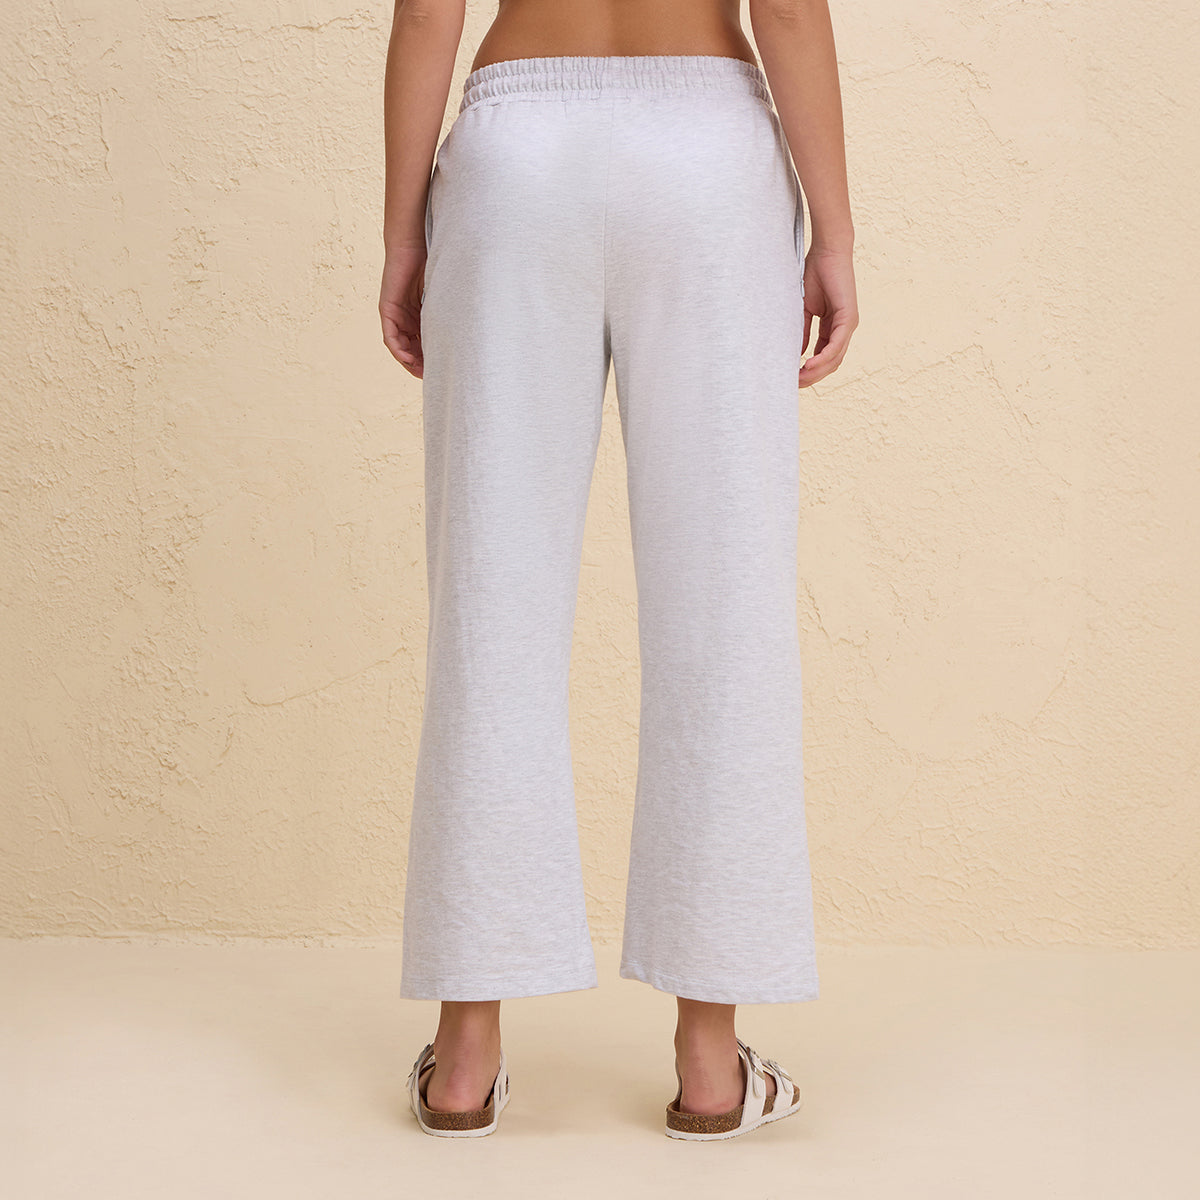 Nykd By Nykaa Comfort Cotton French Terry Straight Leg Lounge Track Pants-NYLE606-Grey Melange